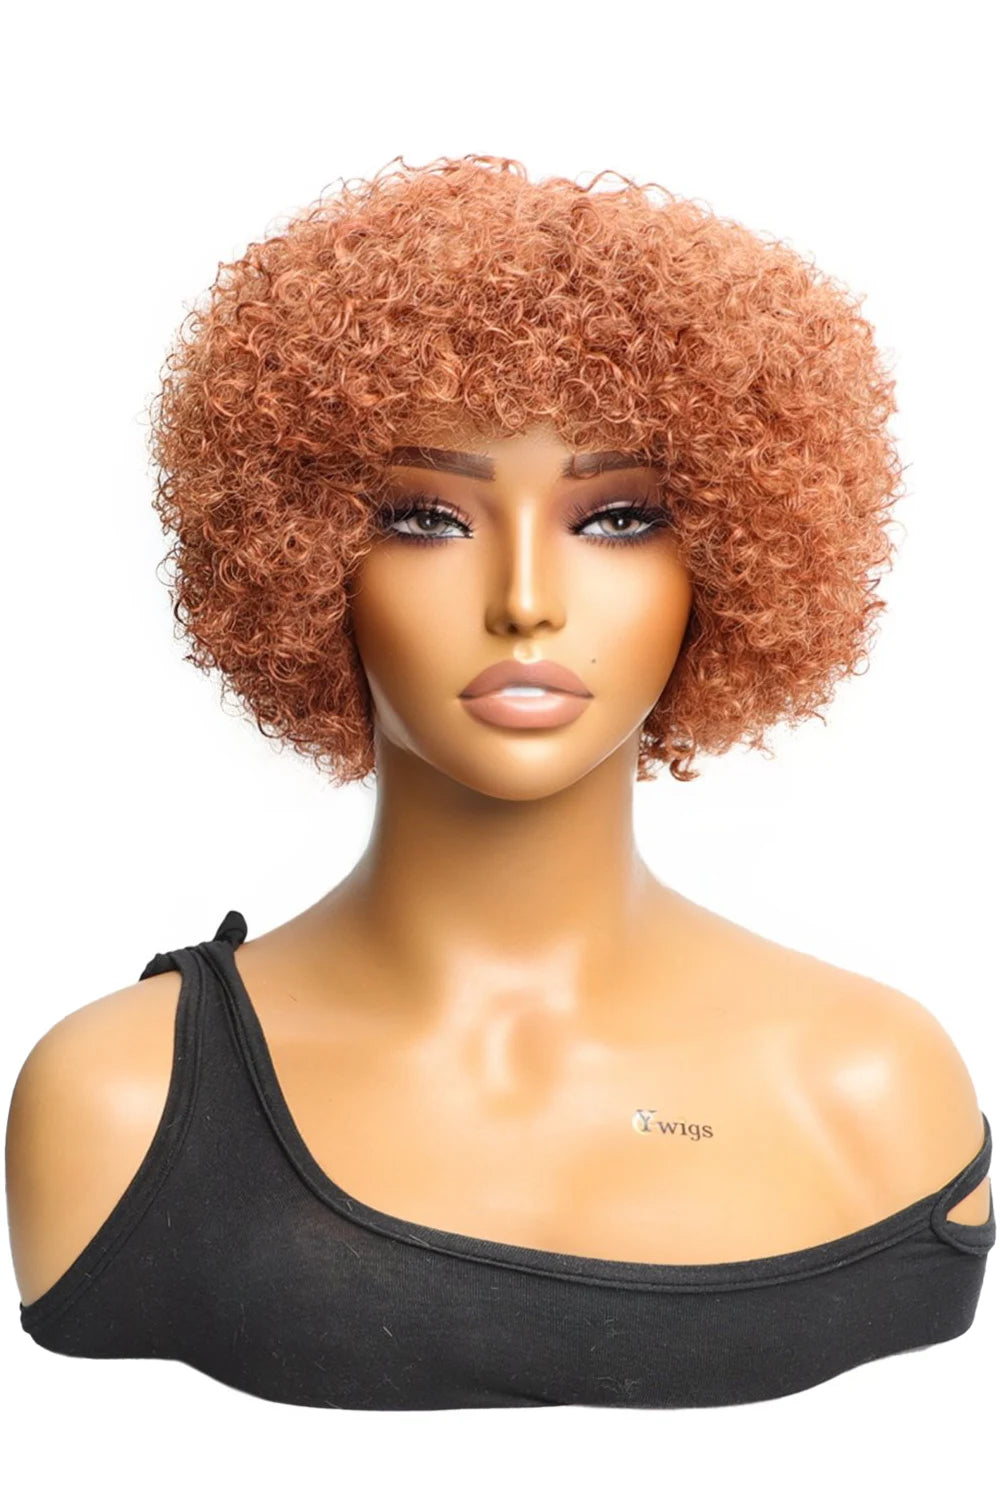 ice-spice-wig-ginger-pixie-bob-afro-human-hair-4a-curly-non-lace-1